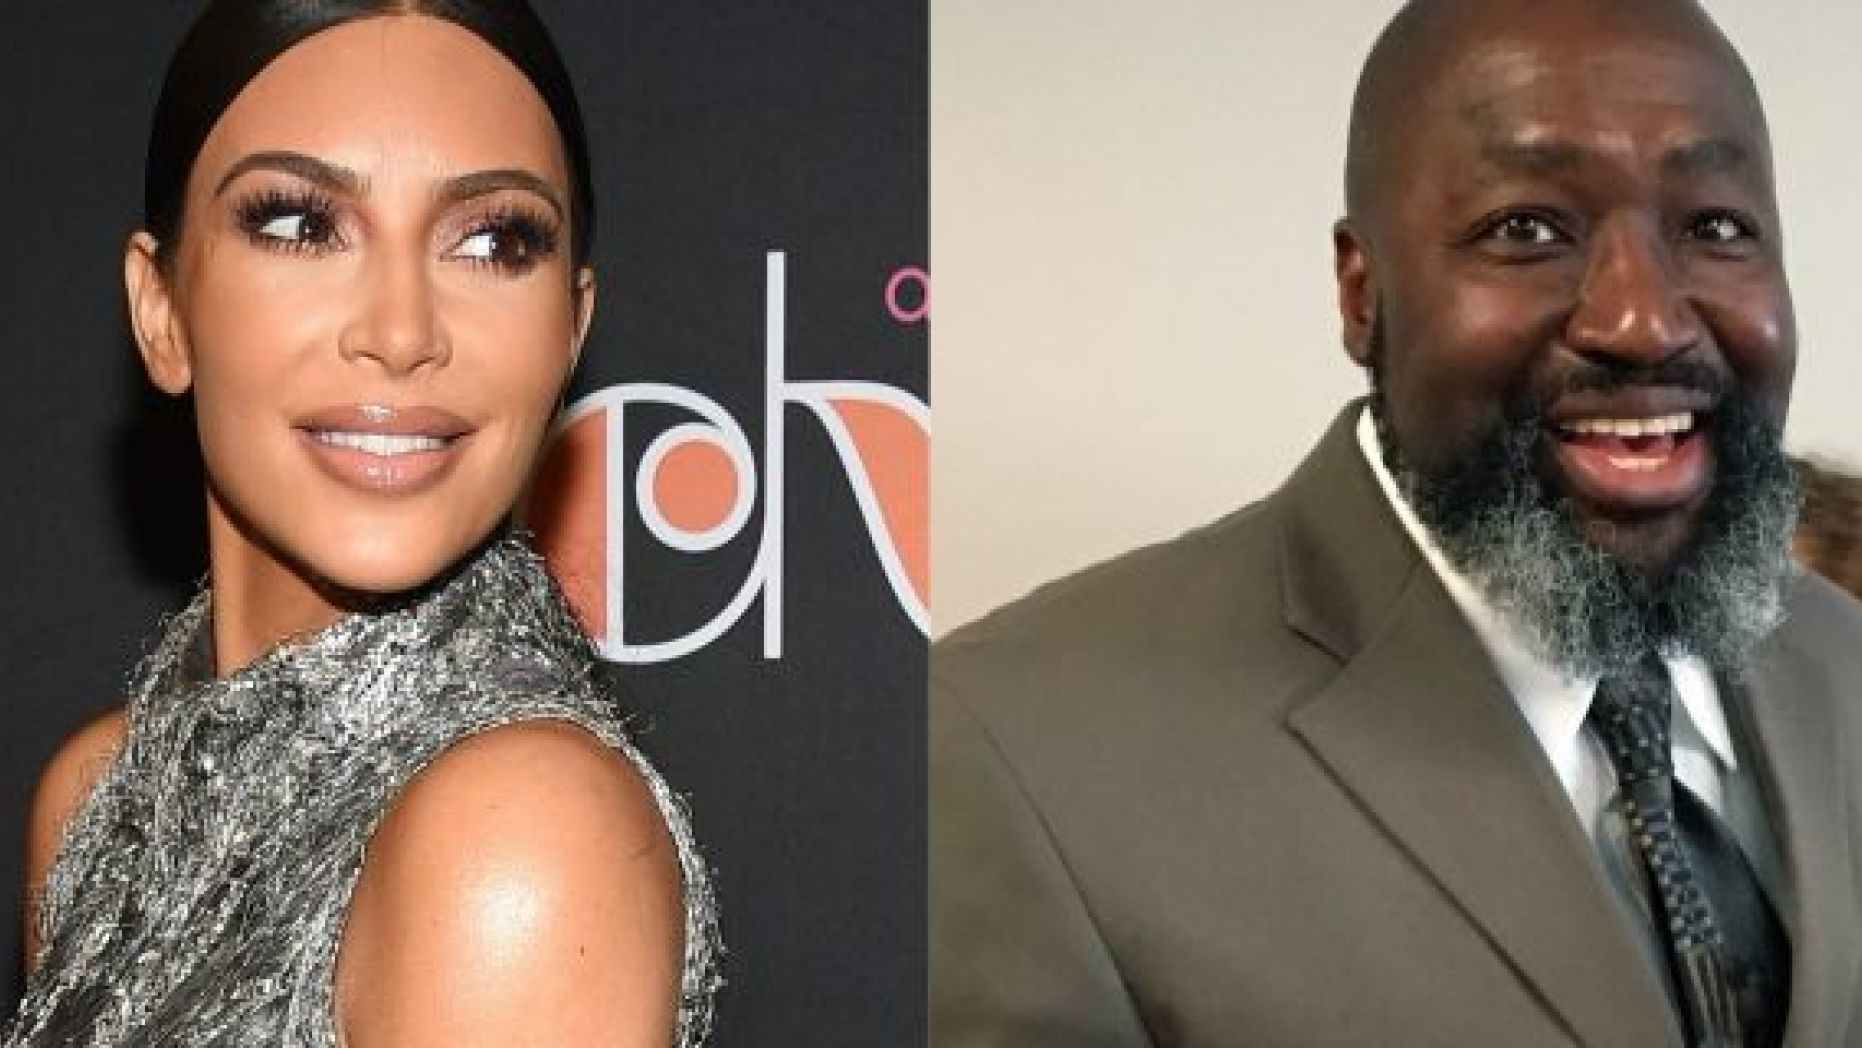 Kim Kardashian to pay 5 years rent for man recently released from prison